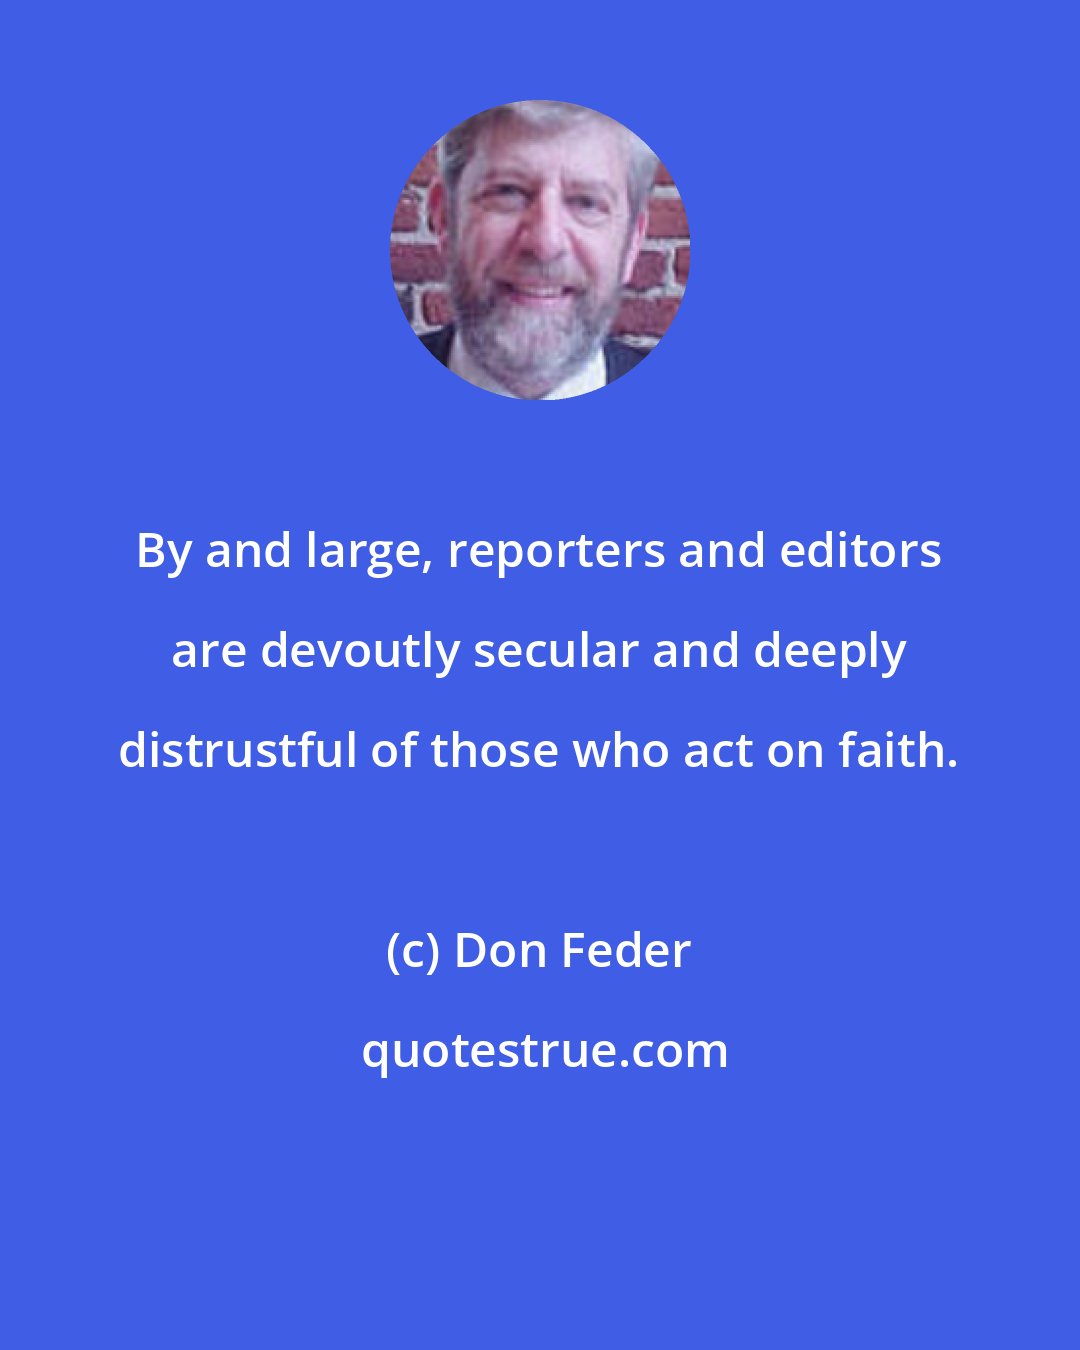 Don Feder: By and large, reporters and editors are devoutly secular and deeply distrustful of those who act on faith.